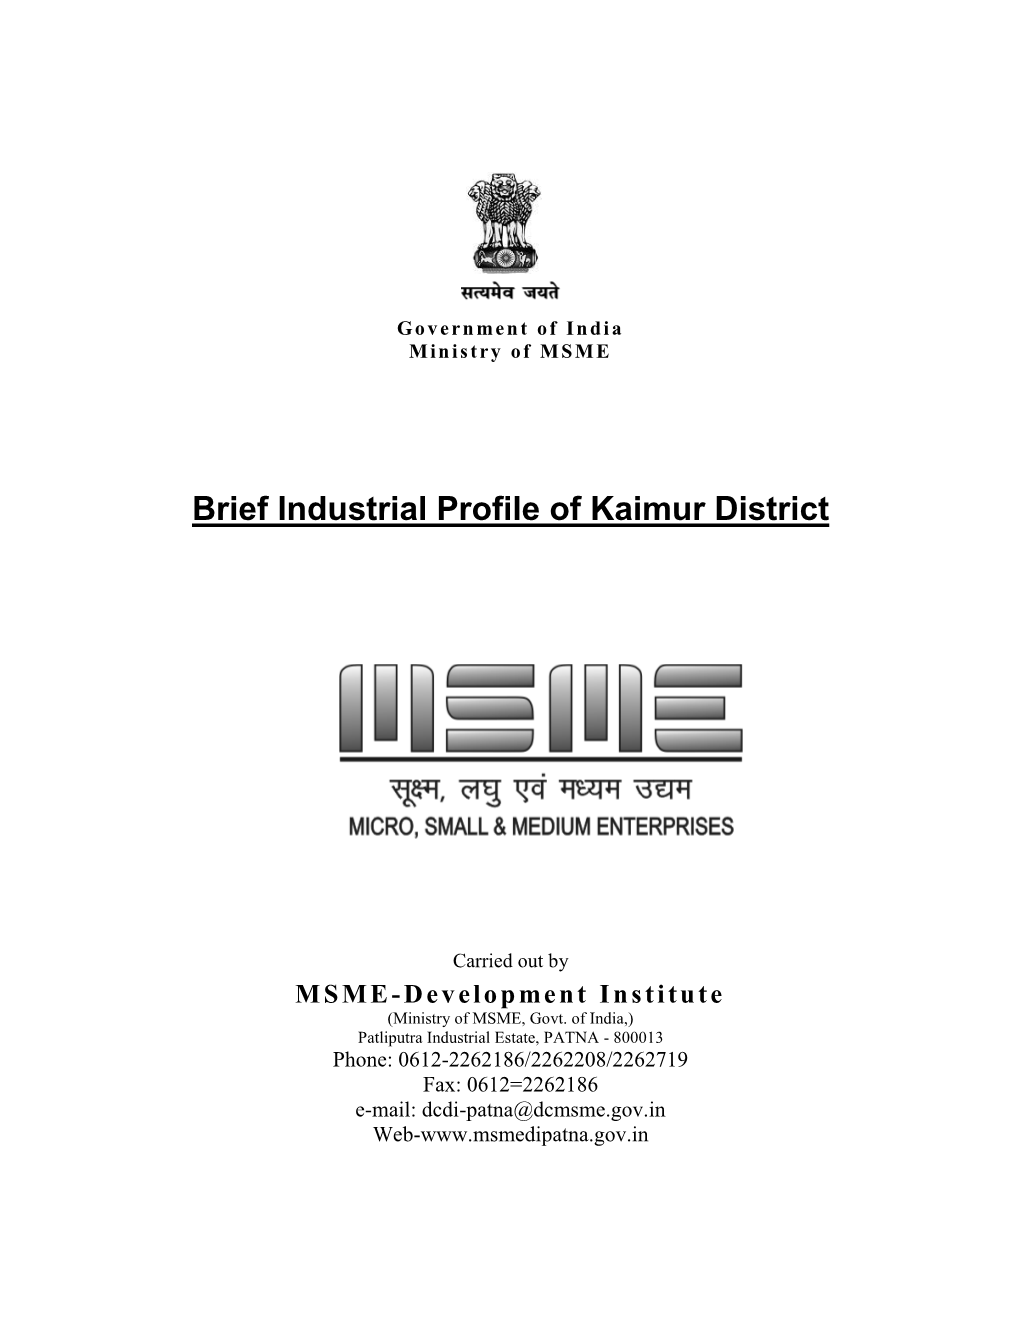 Brief Industrial Profile of Kaimur District